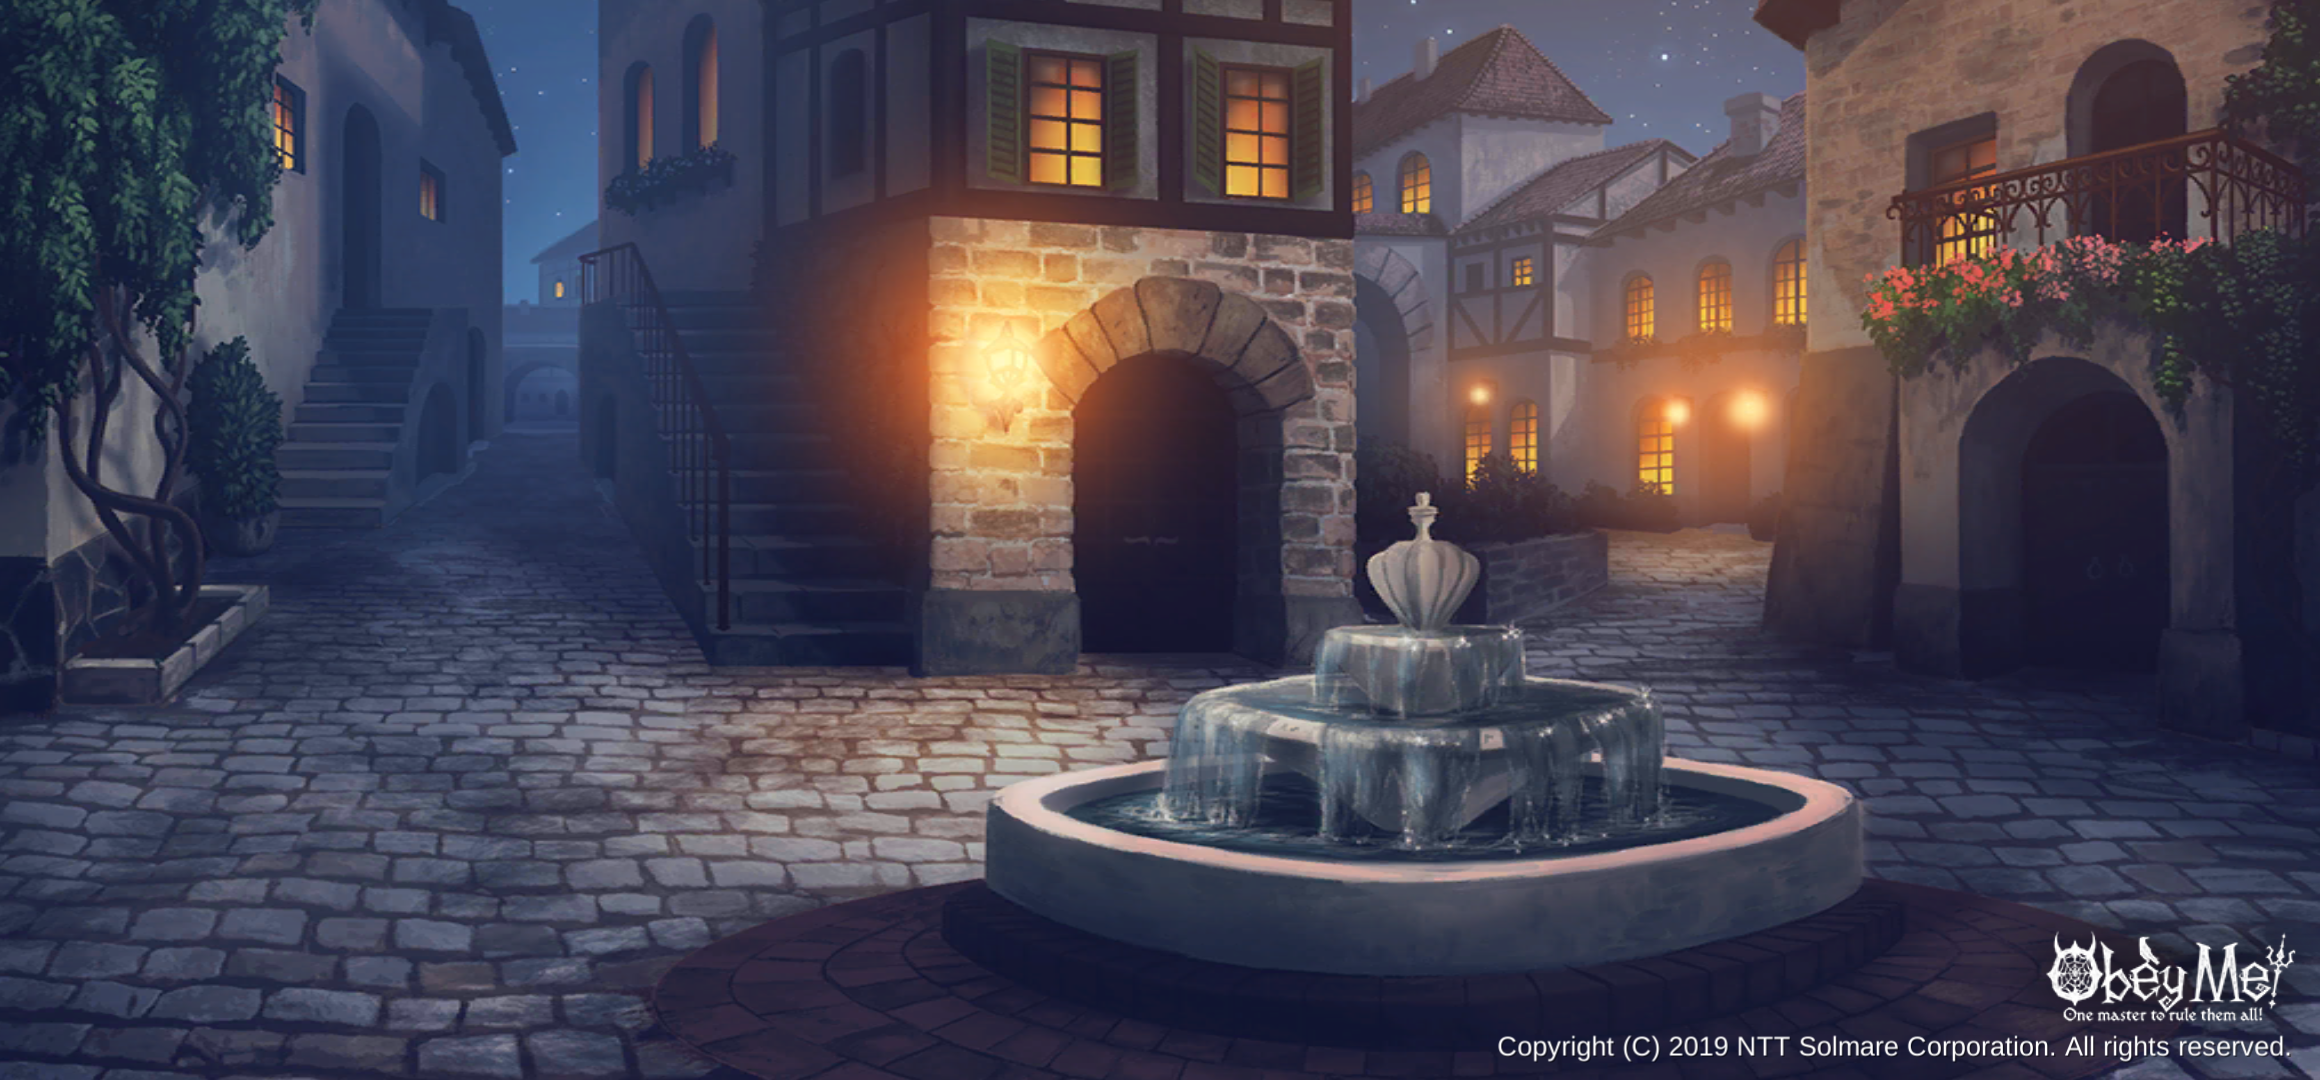 upload "Town With Fountain.png"